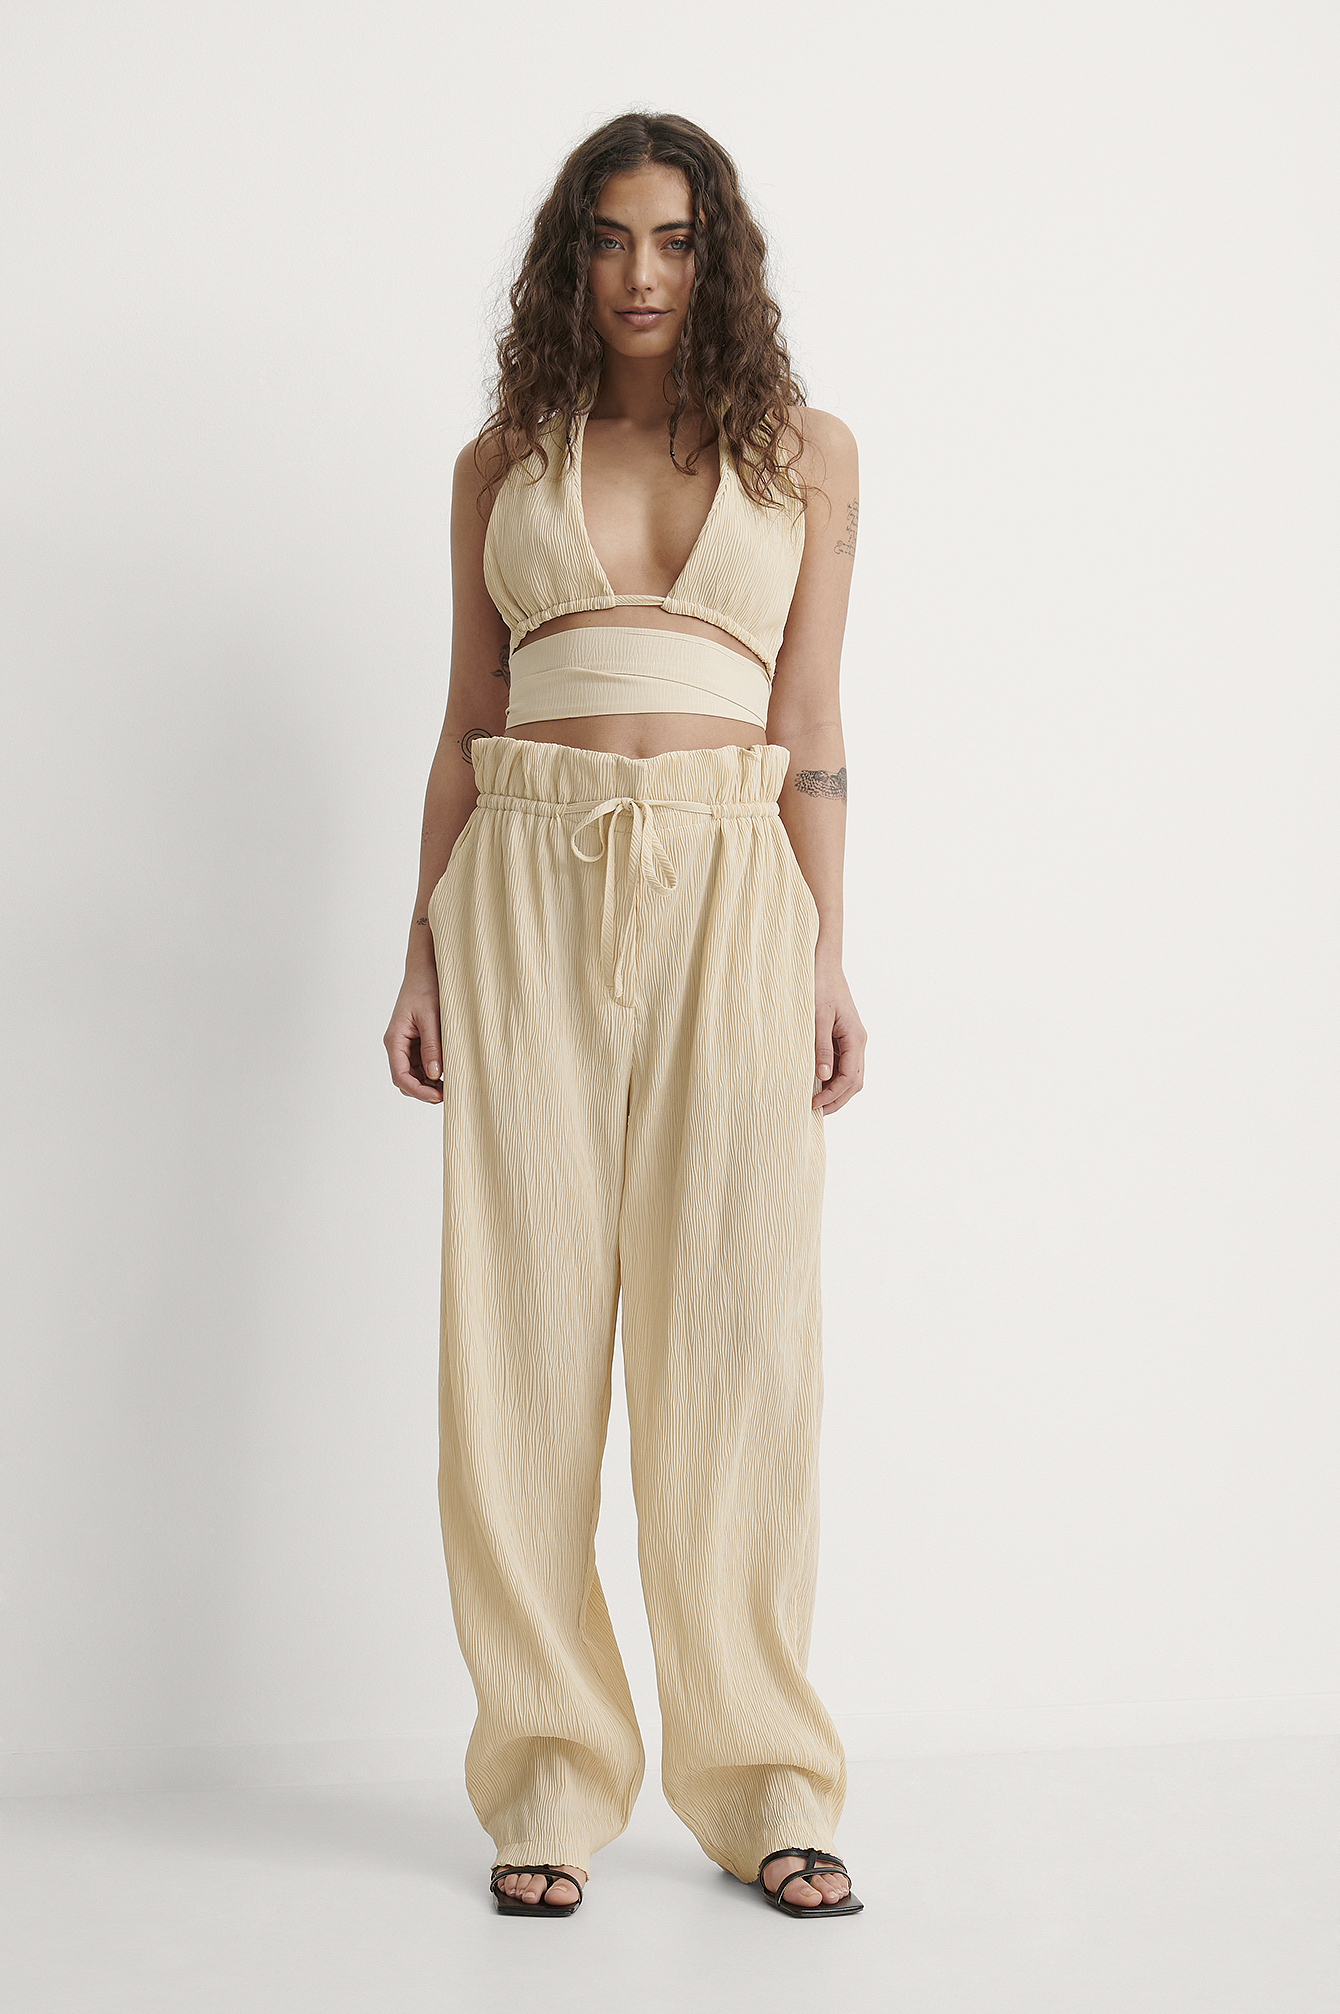 Crinkled Paperwaist Pants Outfit